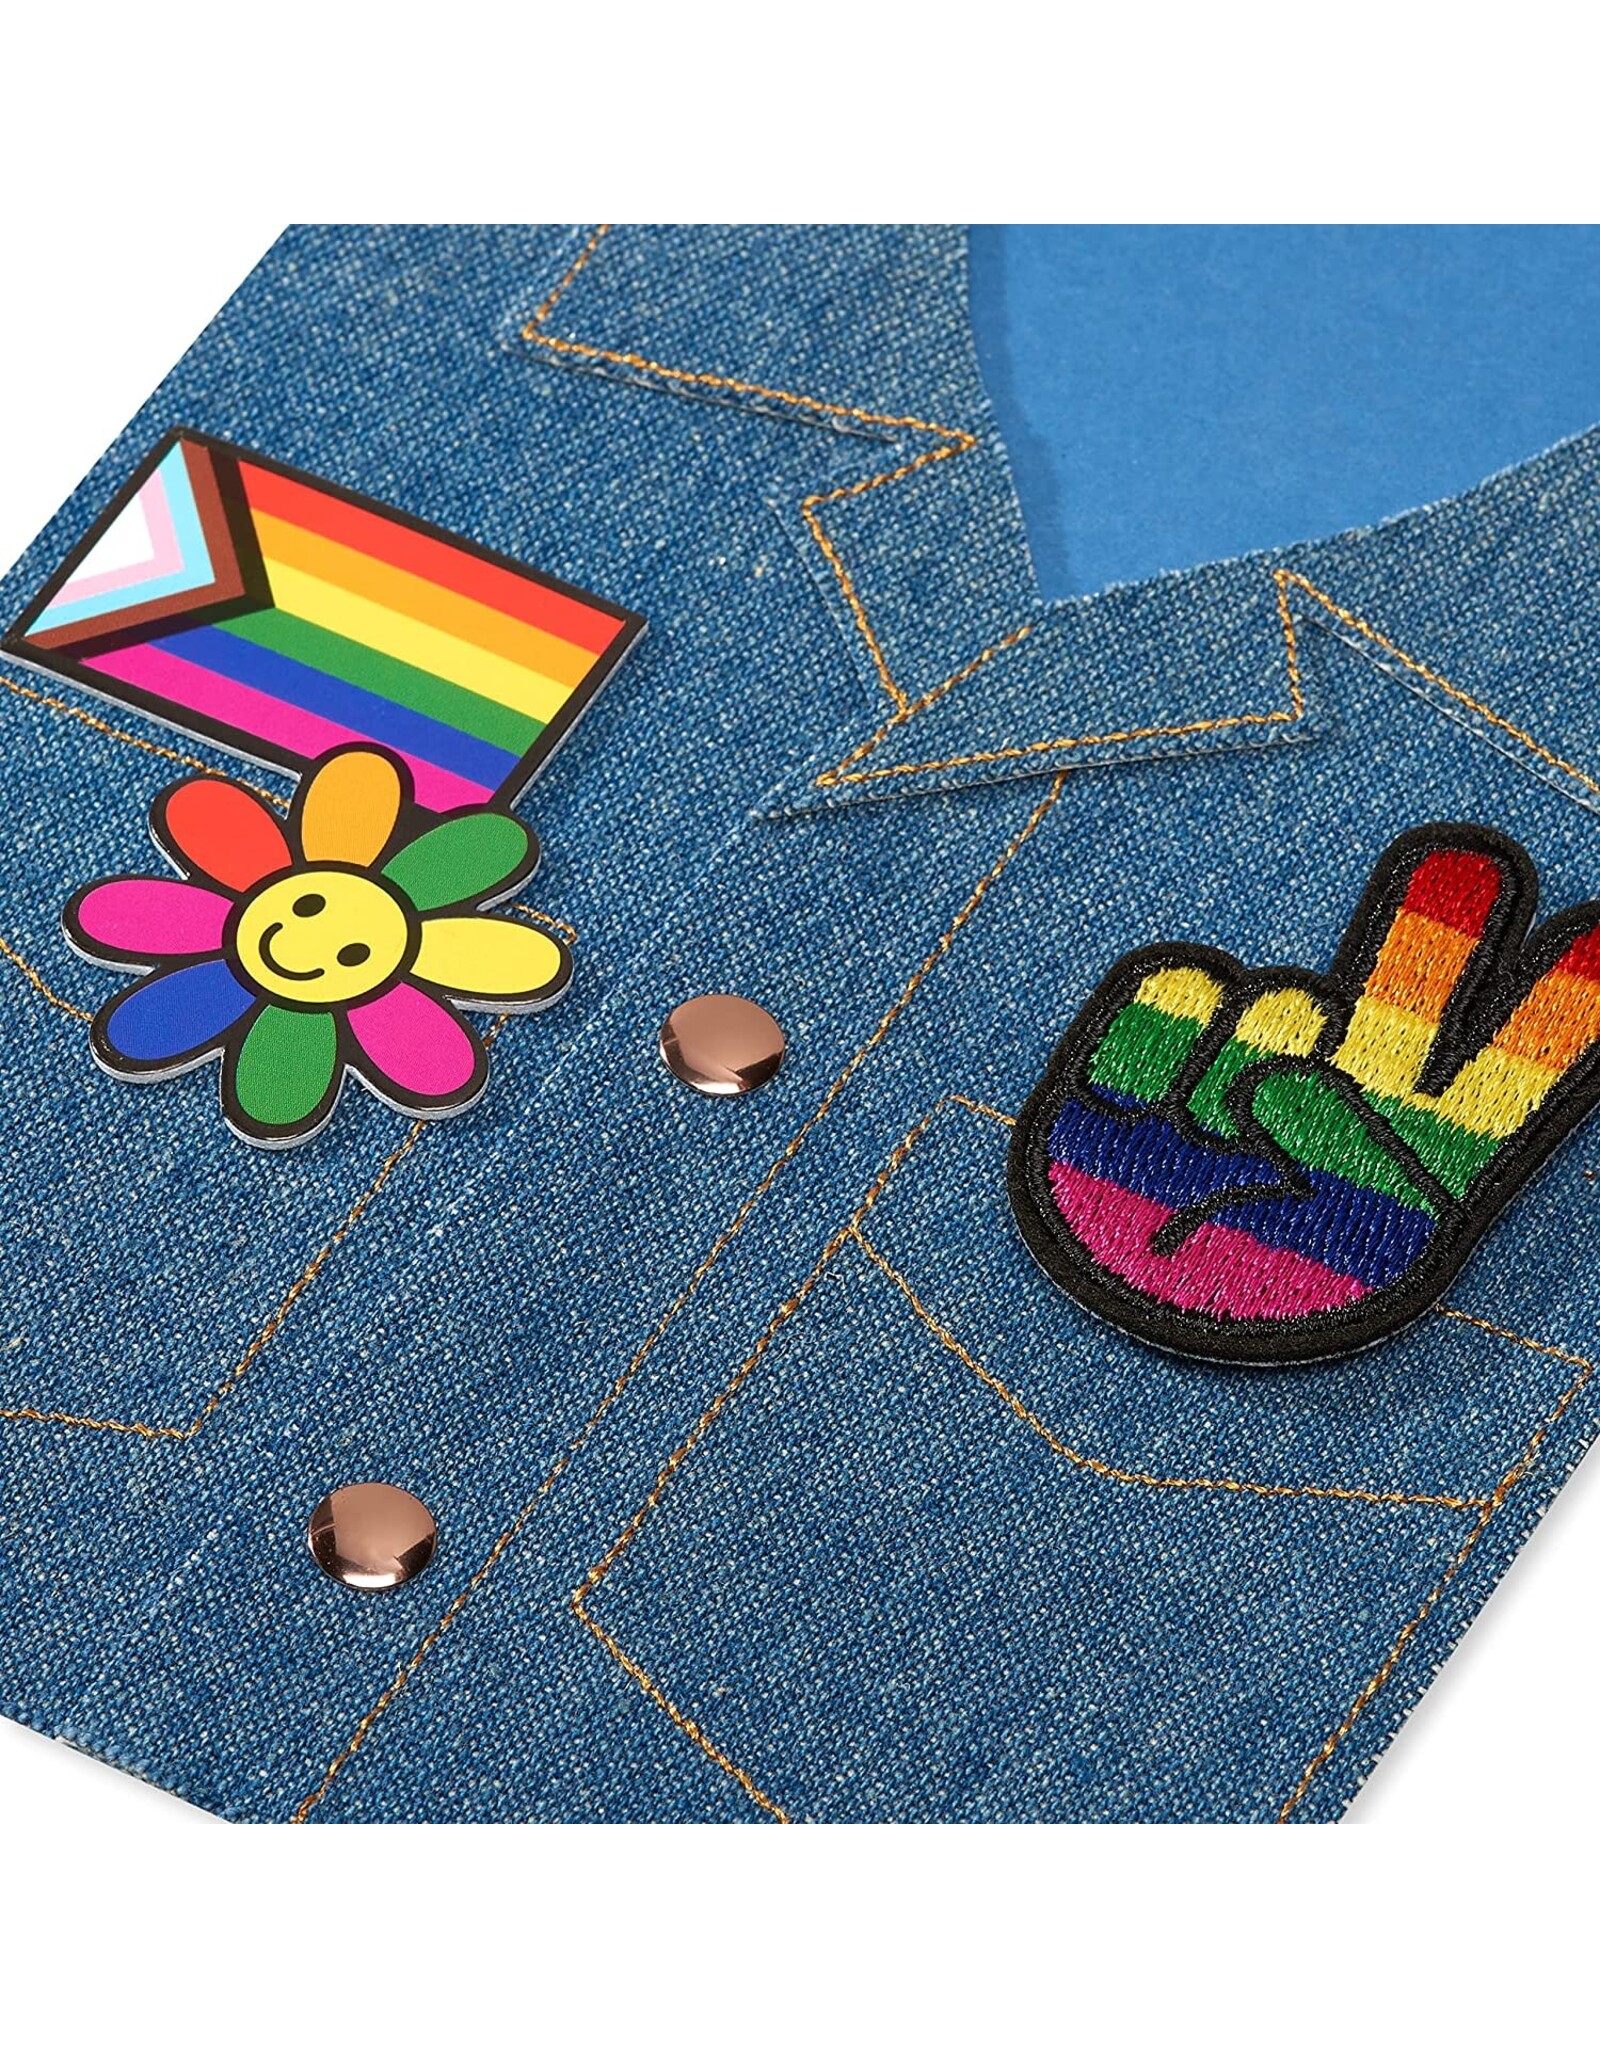 PAPYRUS® Blank Card LGBTQIA+ Pride Jean Jacket With Patches